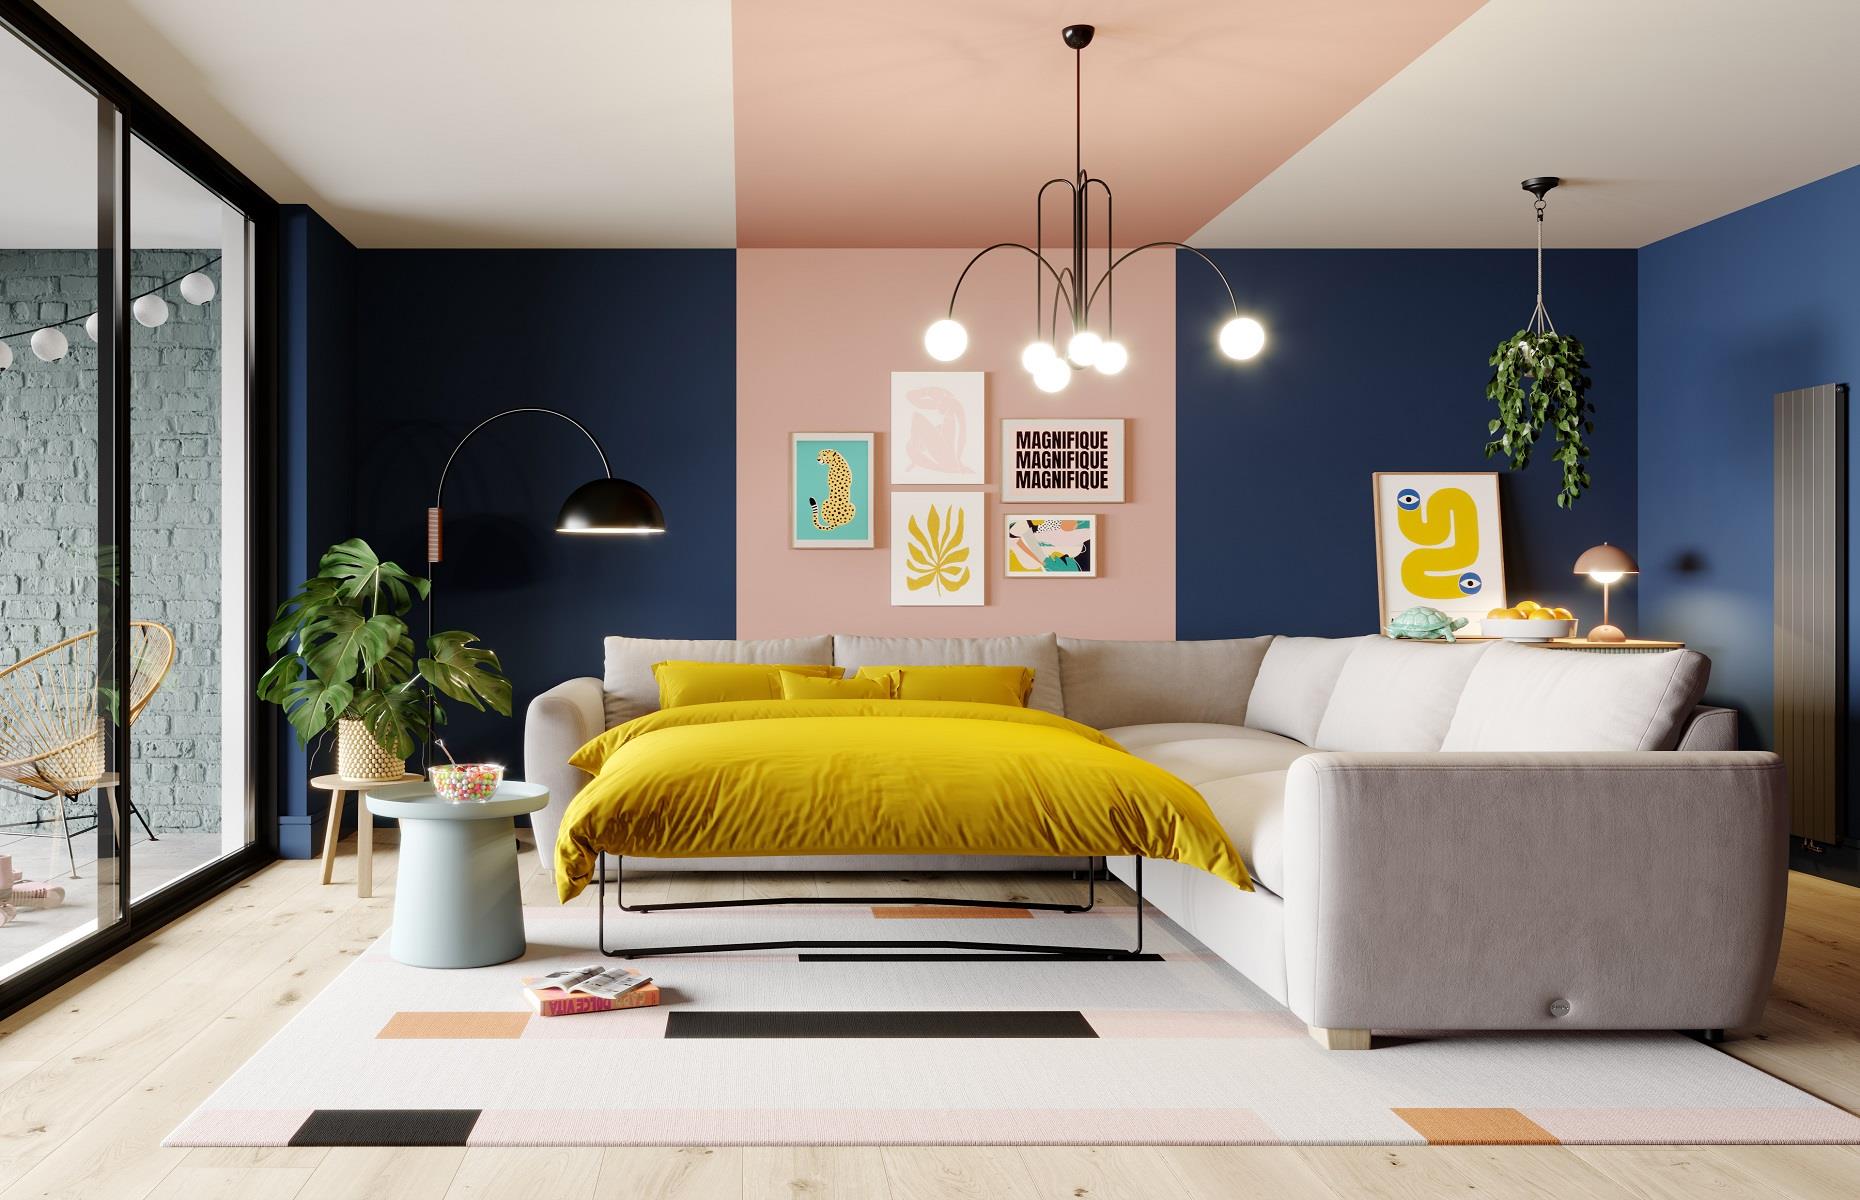 <p>A bold feature wall makes a striking addition to a home and creates a clear visual link between adjacent living areas. Painting the walls opposite each other the same hue can elongate a small space, while a strong focal feature can really add wow-factor.</p>